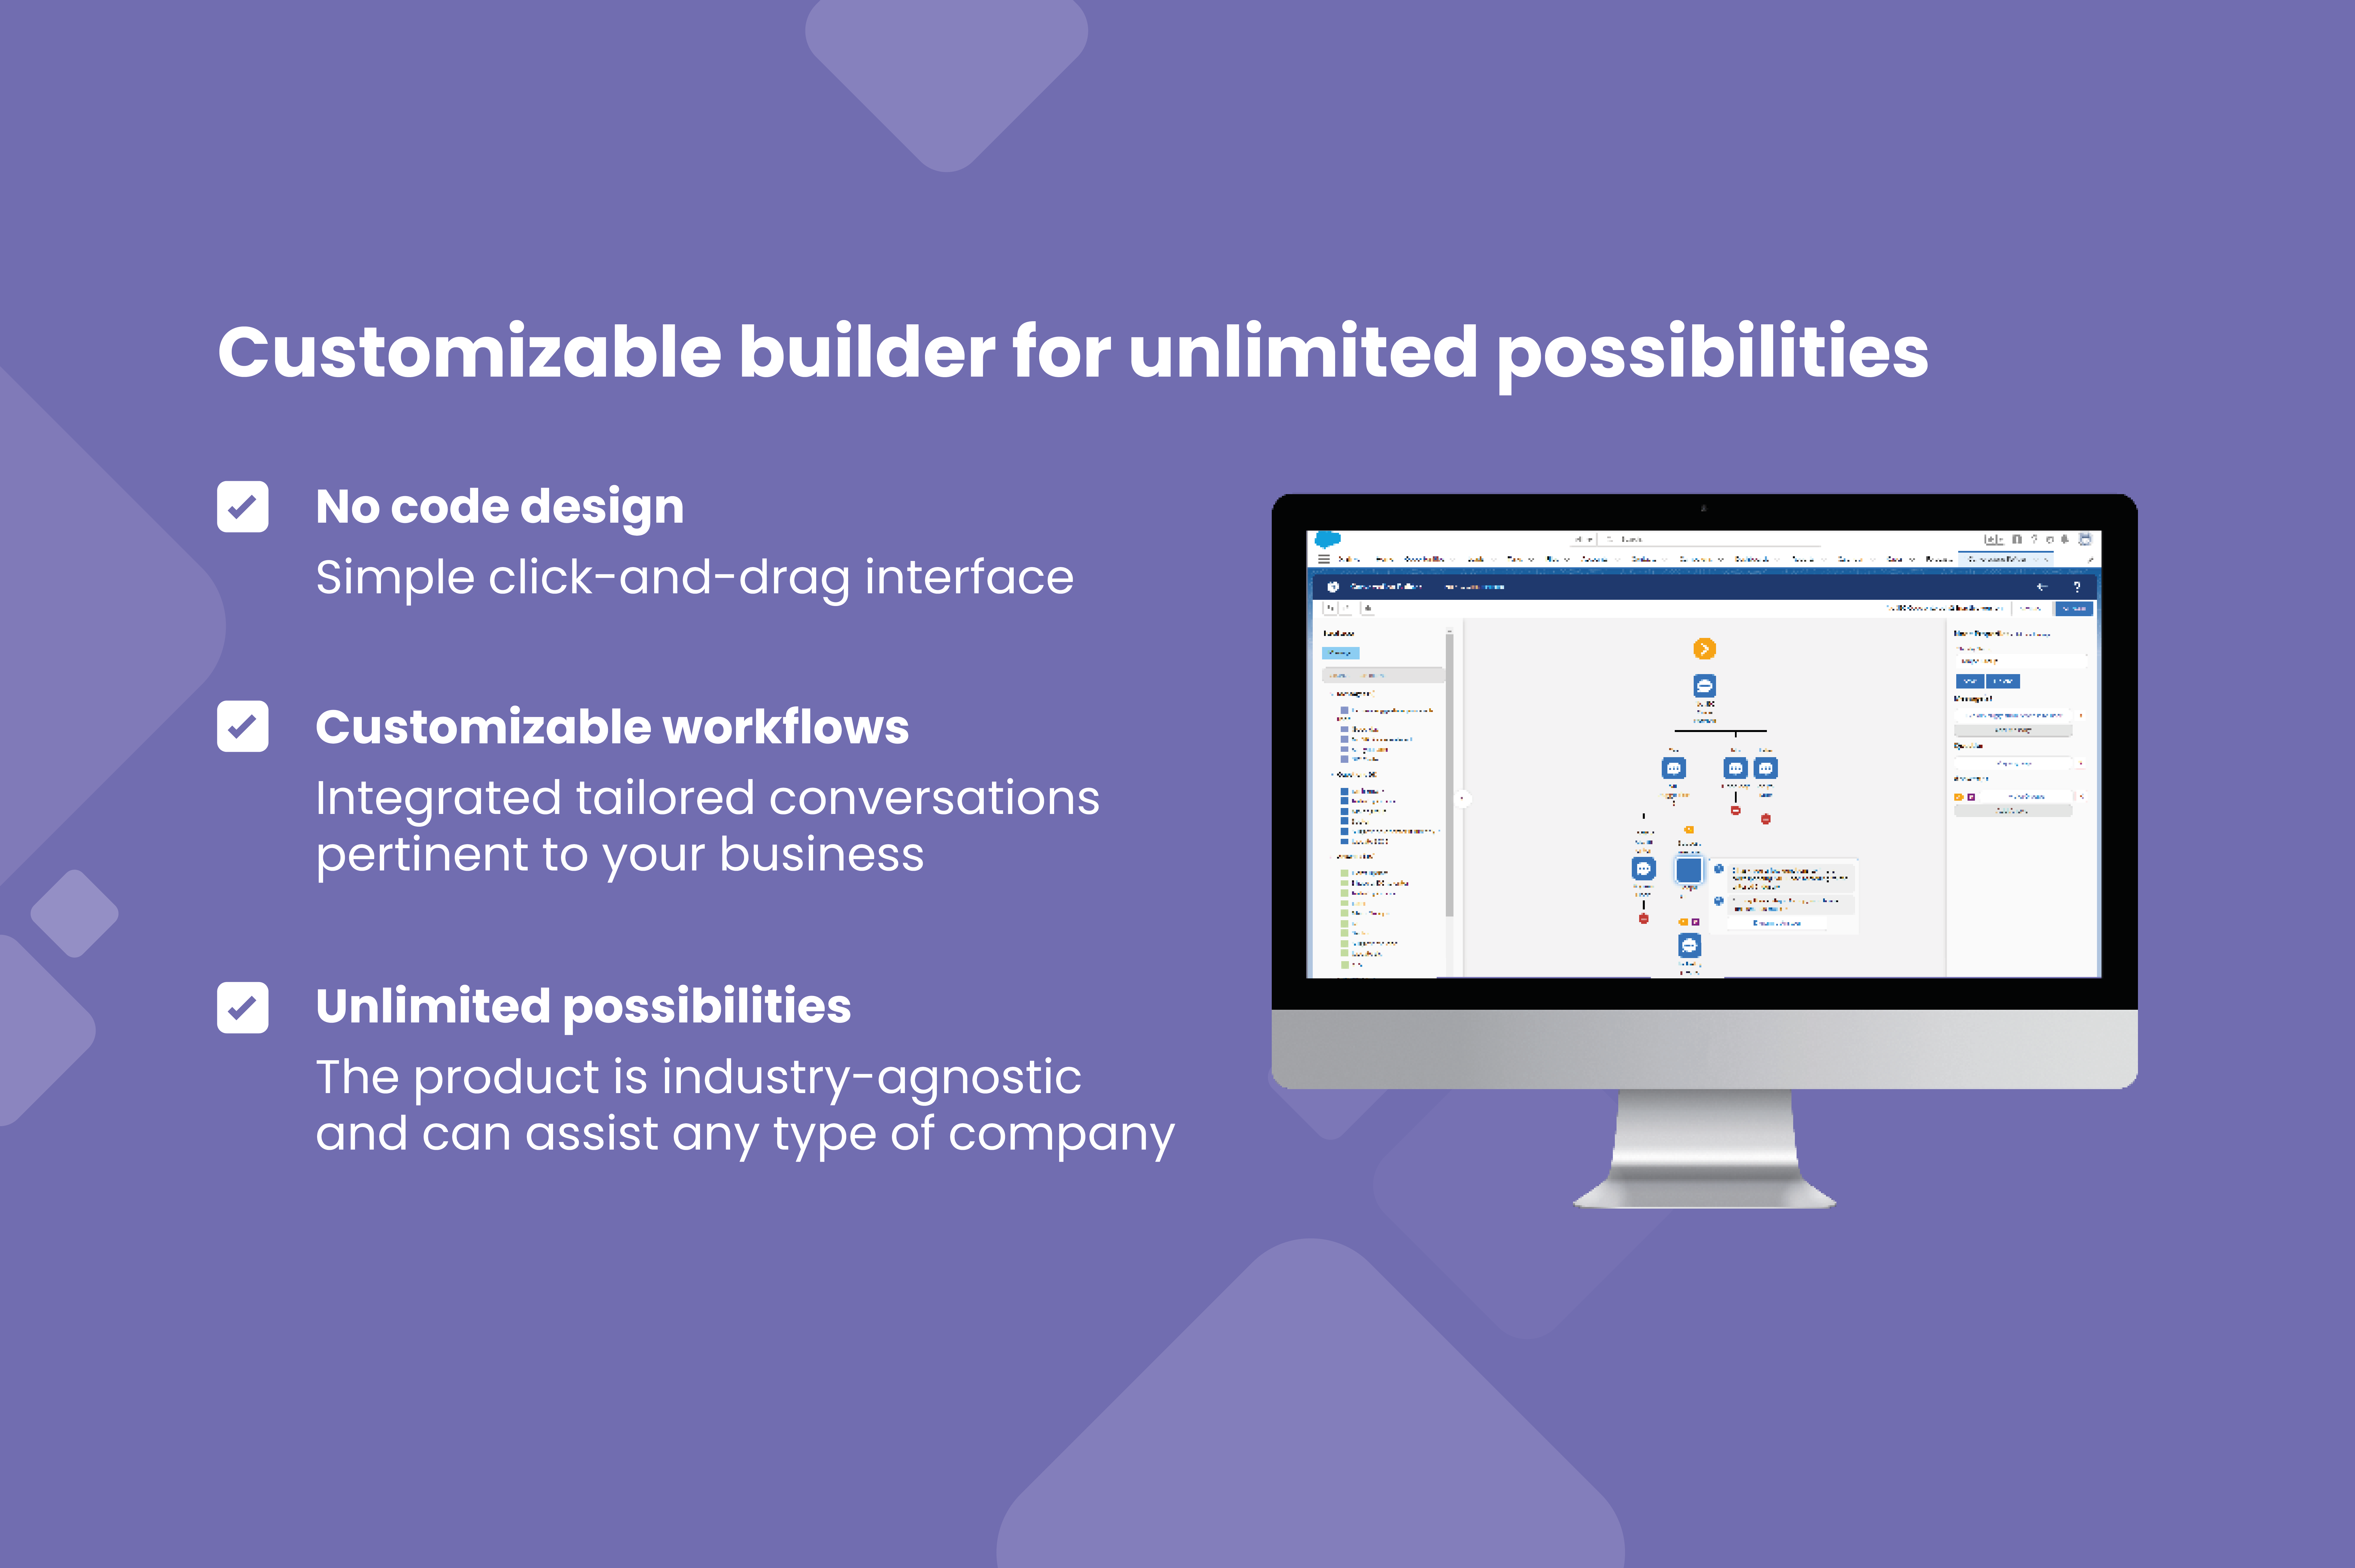 We designed a no-code, customizable builder that is available to customize the pre-made templates or build your own workflows specific to your business needs.